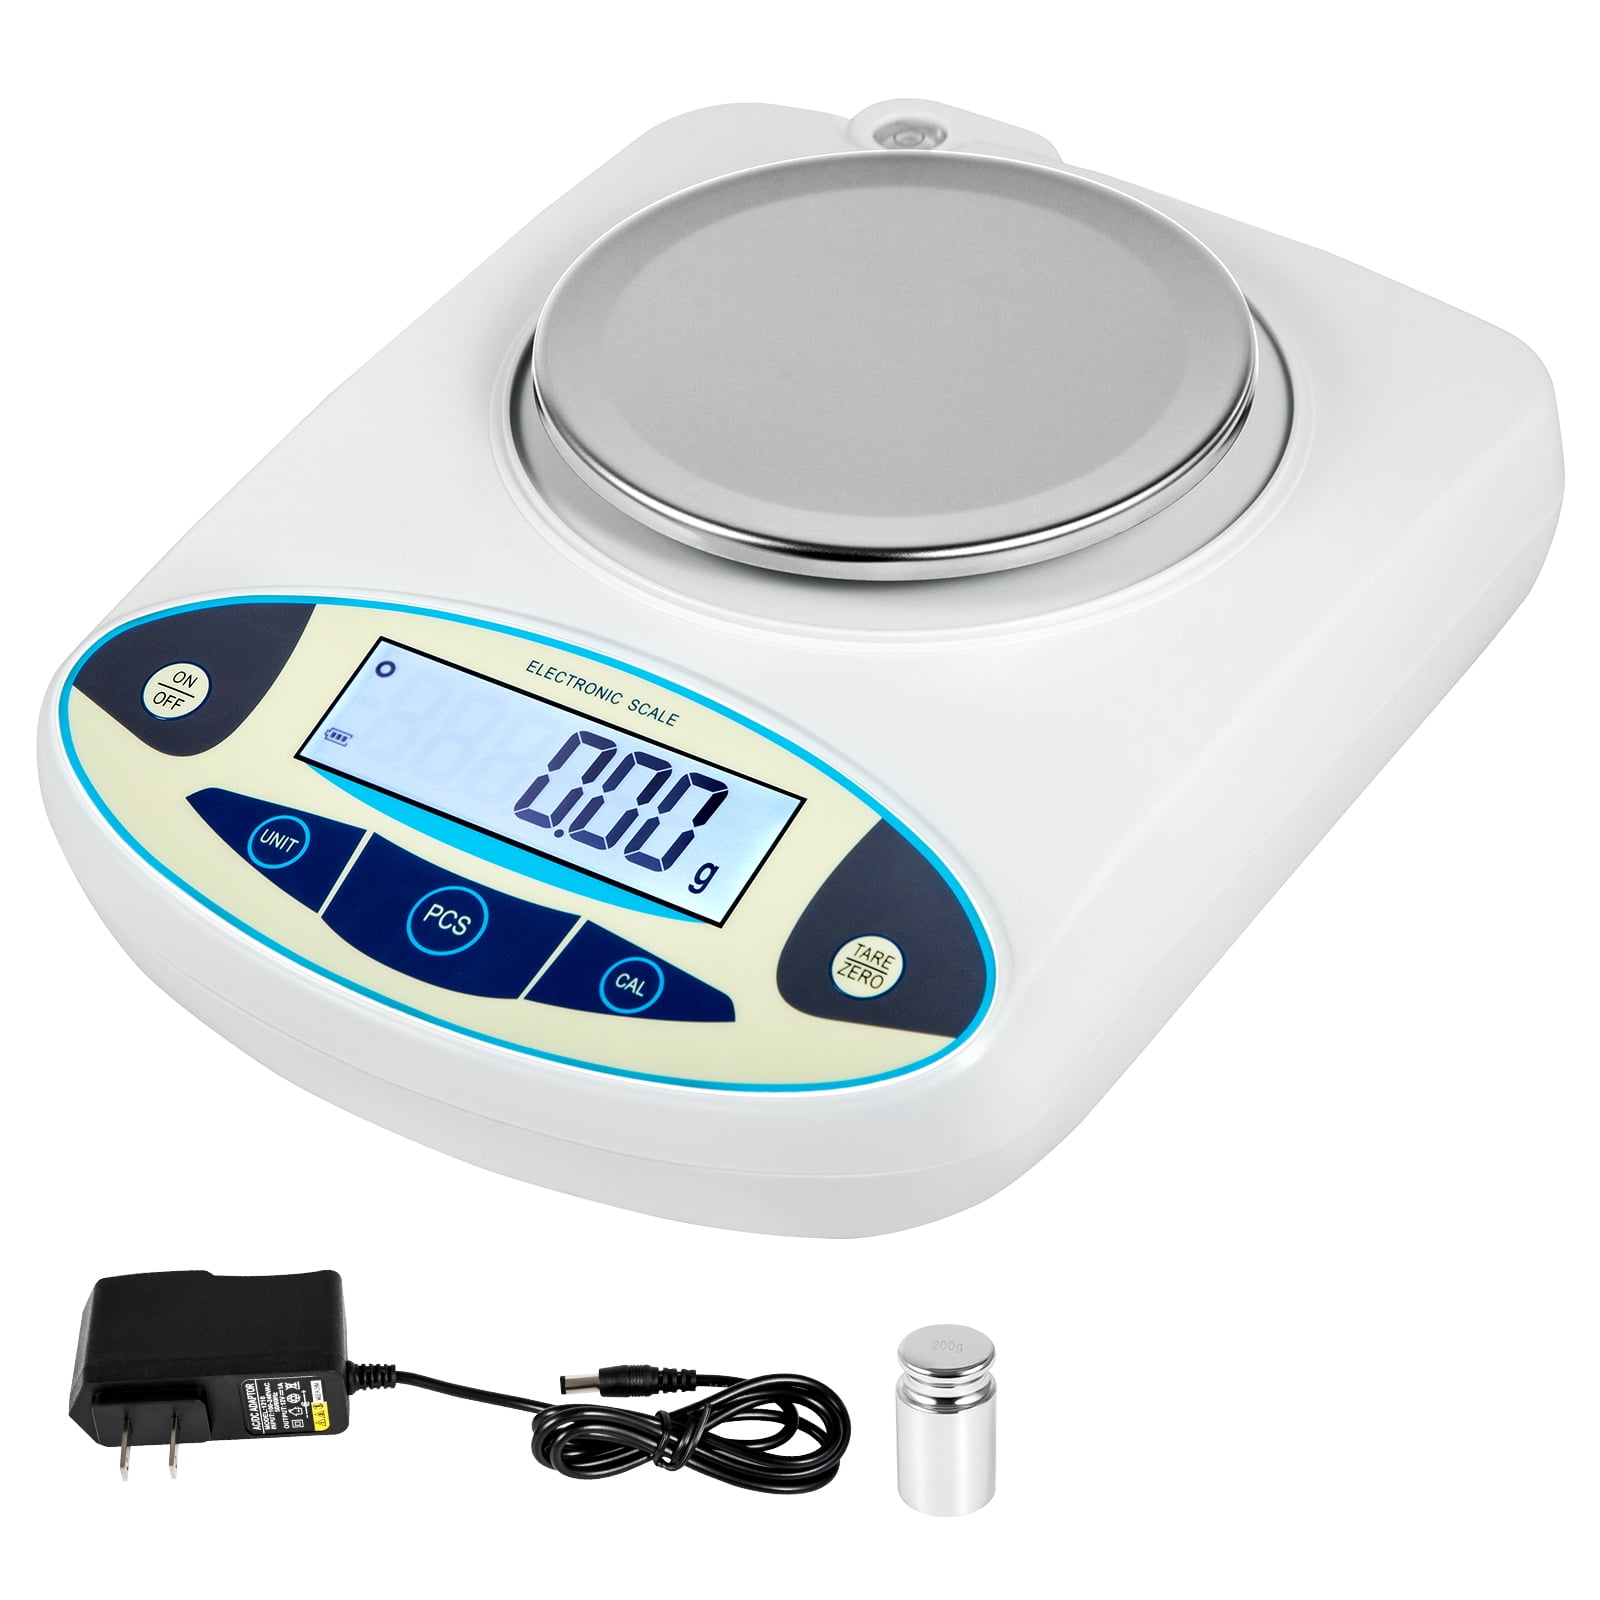 Laboratory Weighing Scales  Capacity 200gm, 300gm, 600gm & 1000gm